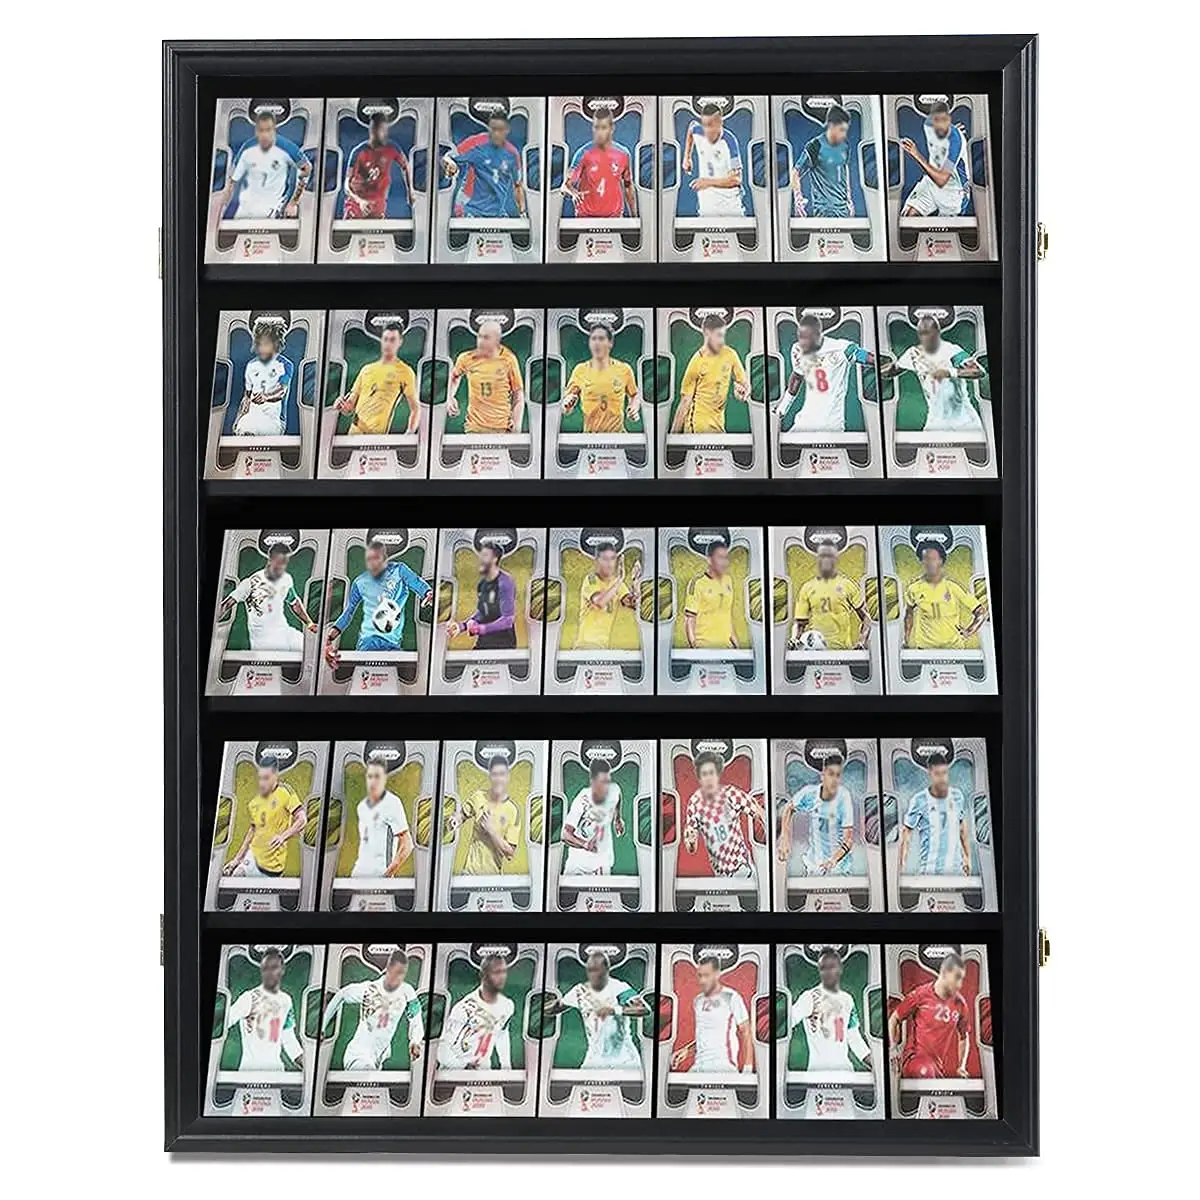 35 Graded Baseball Card Display Case Collectible Card Display Frame with UV Protection Clear View Lockable Wall Cabinet